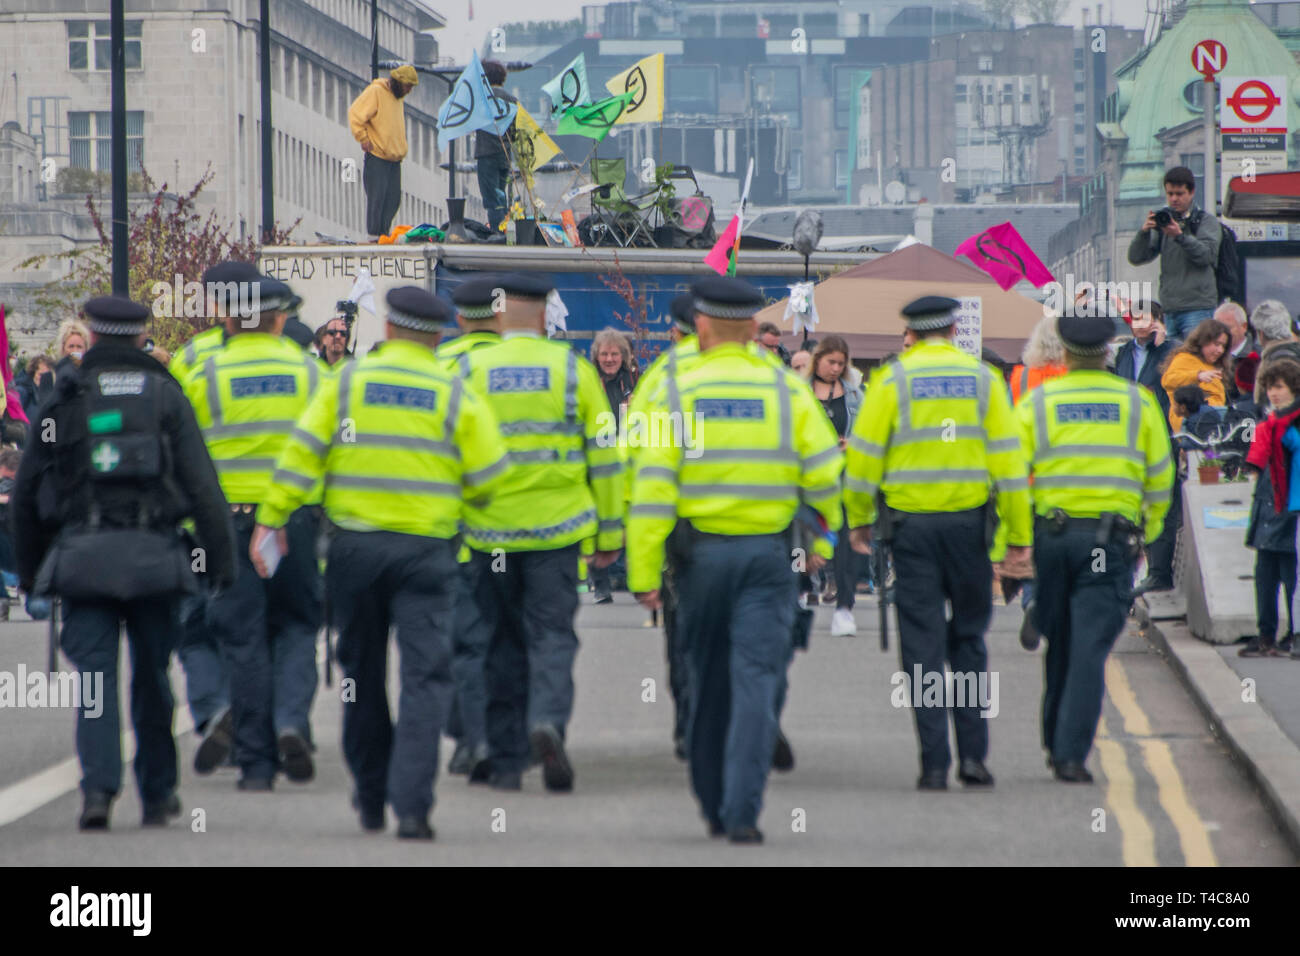 London, UK. 16th Apr, 2019. Police warn people blocking Waterloo Bridge under the public order act and then arrest them if they refuse to move to Marble Arch. It is mostly good humoured but some are dragged away to cheers from the remainder -  Day 2 - Protestors from Extinction Rebellion block several (Hyde Park, Oxford Cuircus, Warterloo Bridge and Parliament Square) junctions in London as part of their ongoing protest to demand action by the UK Government on the 'climate chrisis'. The action is part of an international co-ordinated protest. Credit: Guy Bell/Alamy Live News Stock Photo